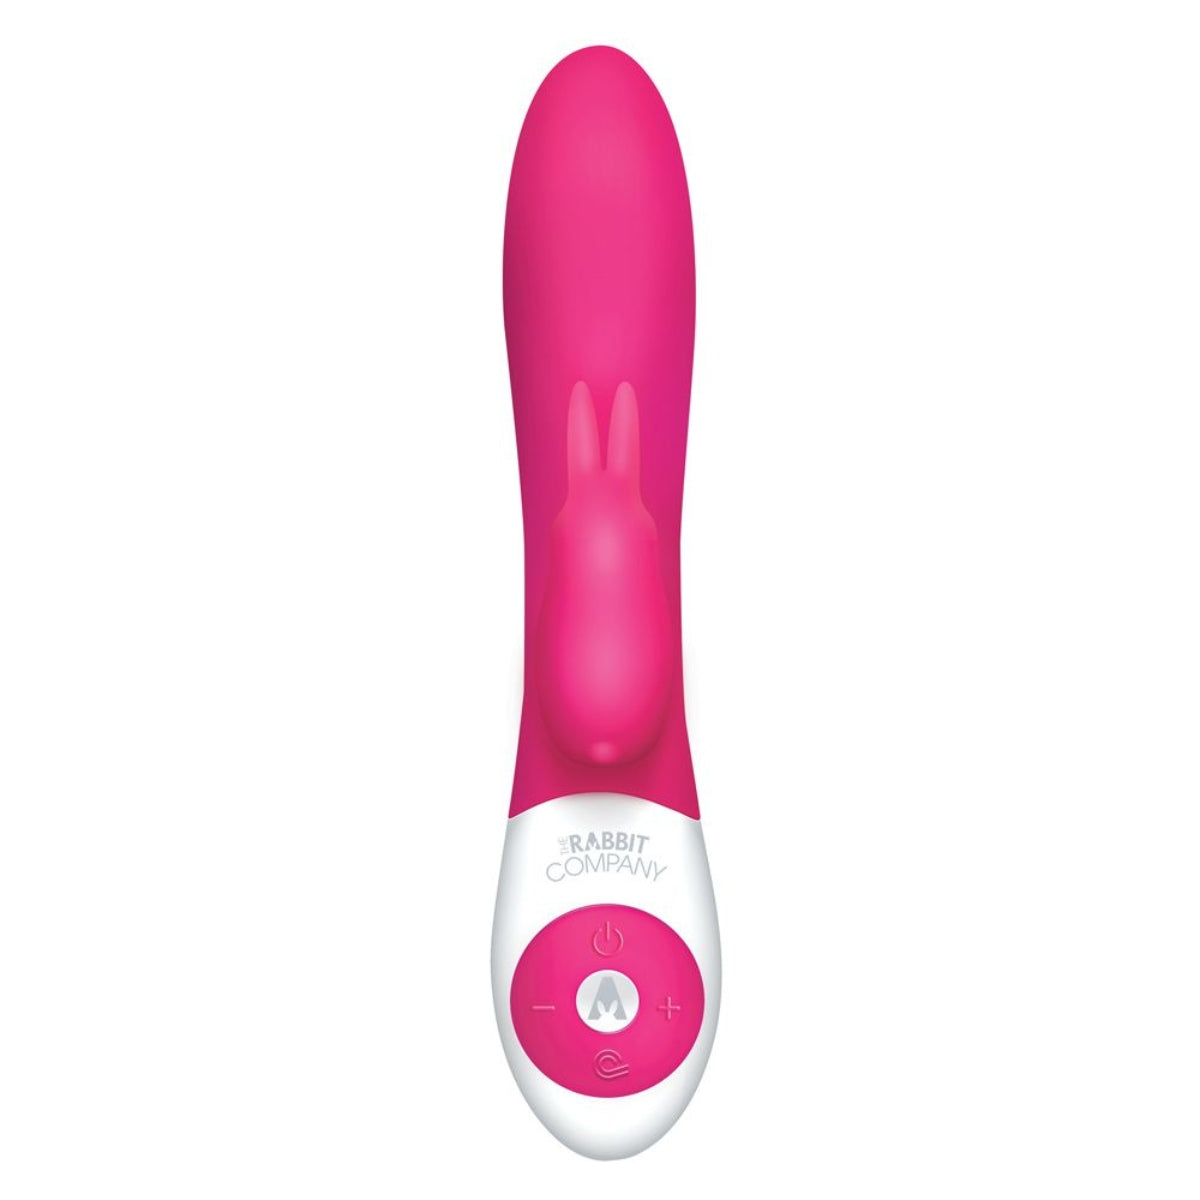 The Rabbit Company The Come Hither Rabbit Vibrator Hot Pink